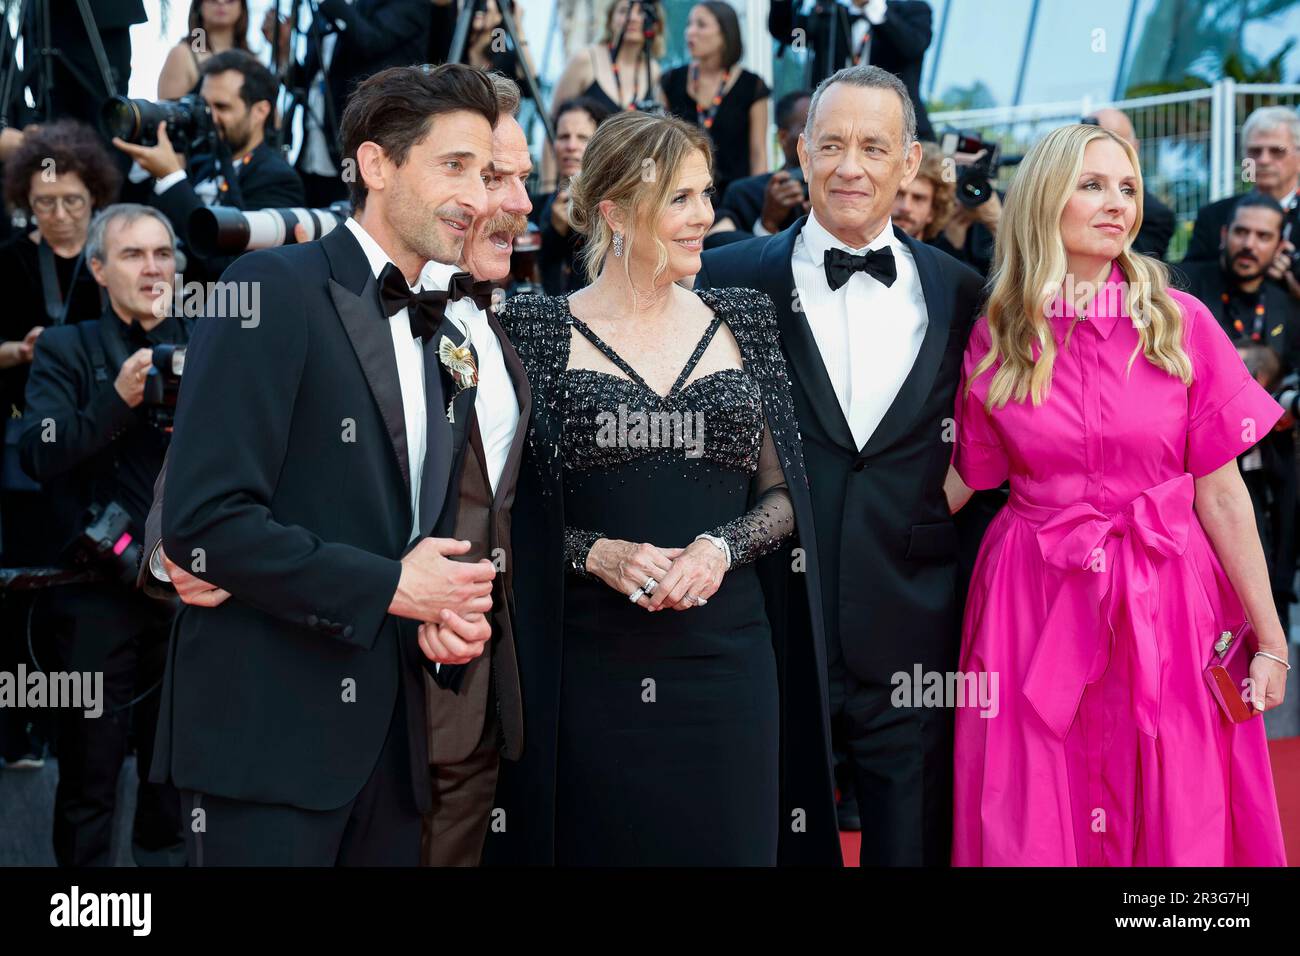 Cannes, France, on 23 May 2023. Adrien Brody, Bryan Cranston, Rita Wilson, Tom Hanks and Hope Davis attend the 'Asteroid City' premiere during the 76th Cannes Film Festival at Palais des Festivals in Cannes, France, on 23 May 2023. Stock Photo